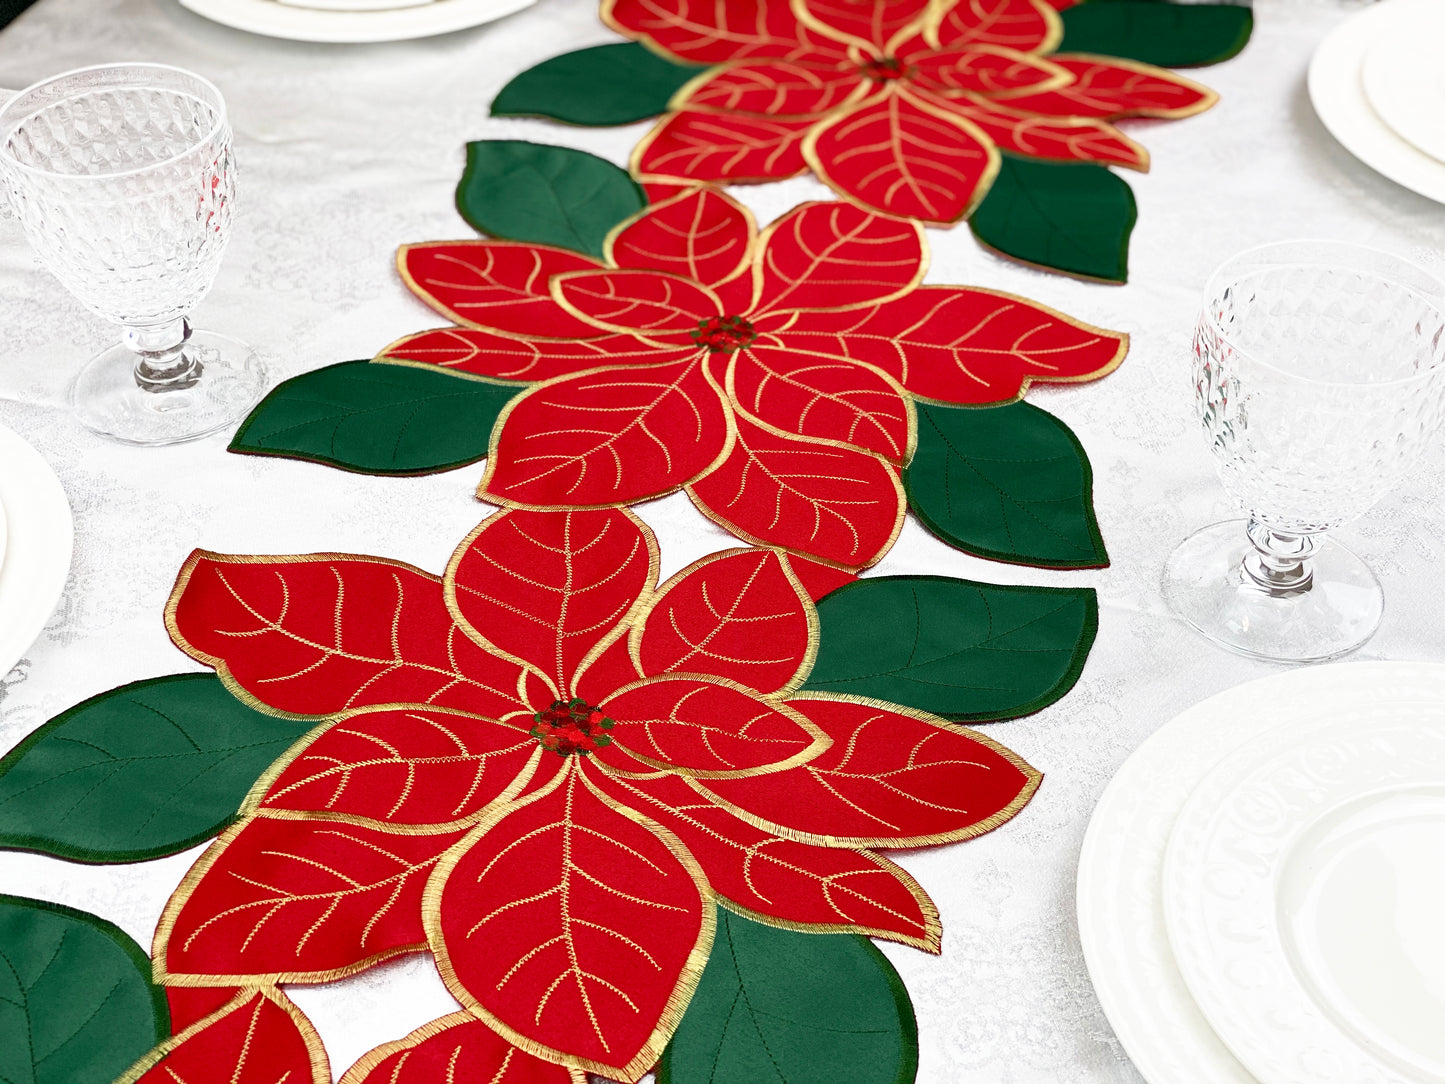 Christmas Poinsettia Embroidered Cutwork 54-Inch Table Runner, Festive Red and Golden Winter Holiday New Year Floral Centerpiece Decor